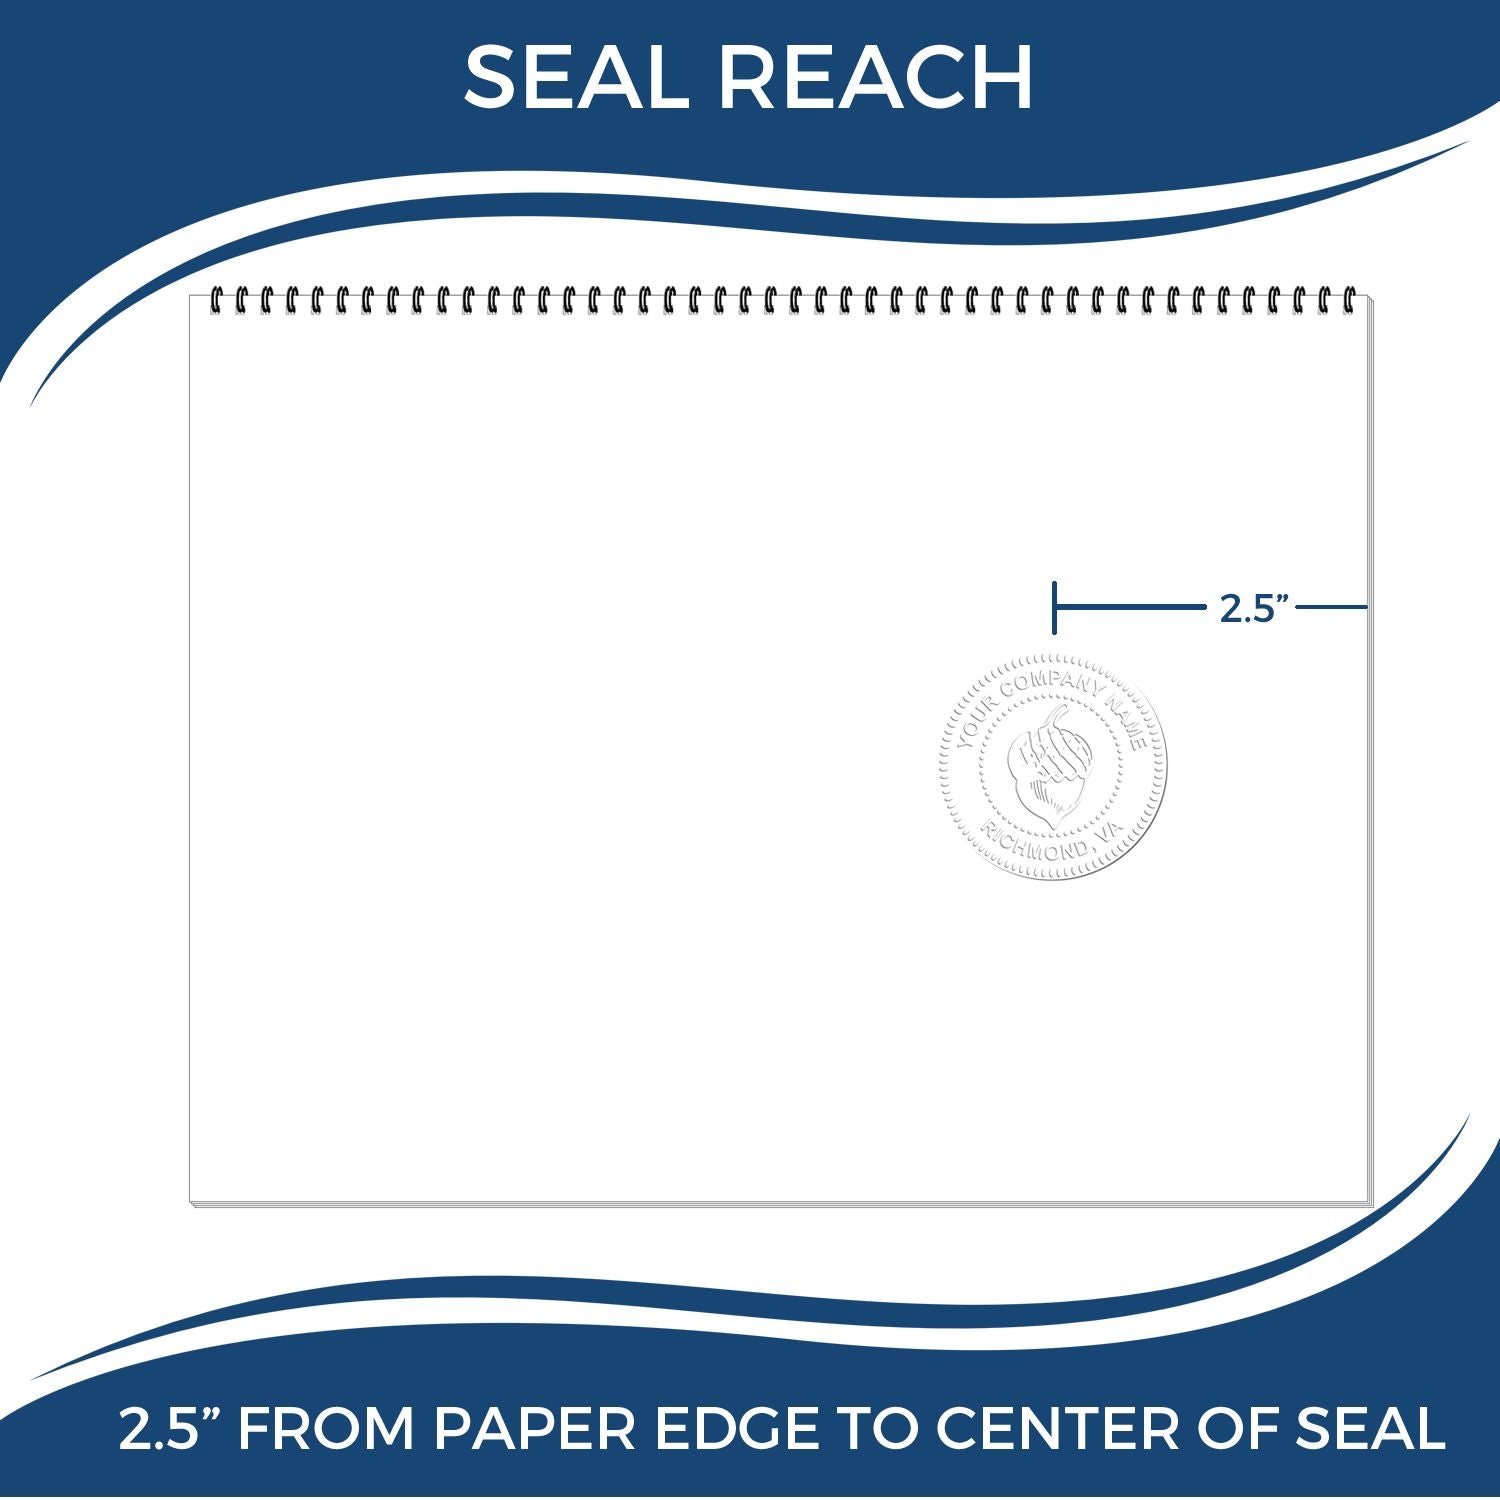 An infographic showing the seal reach which is represented by a ruler and a miniature seal image of the Long Reach Virginia Land Surveyor Seal